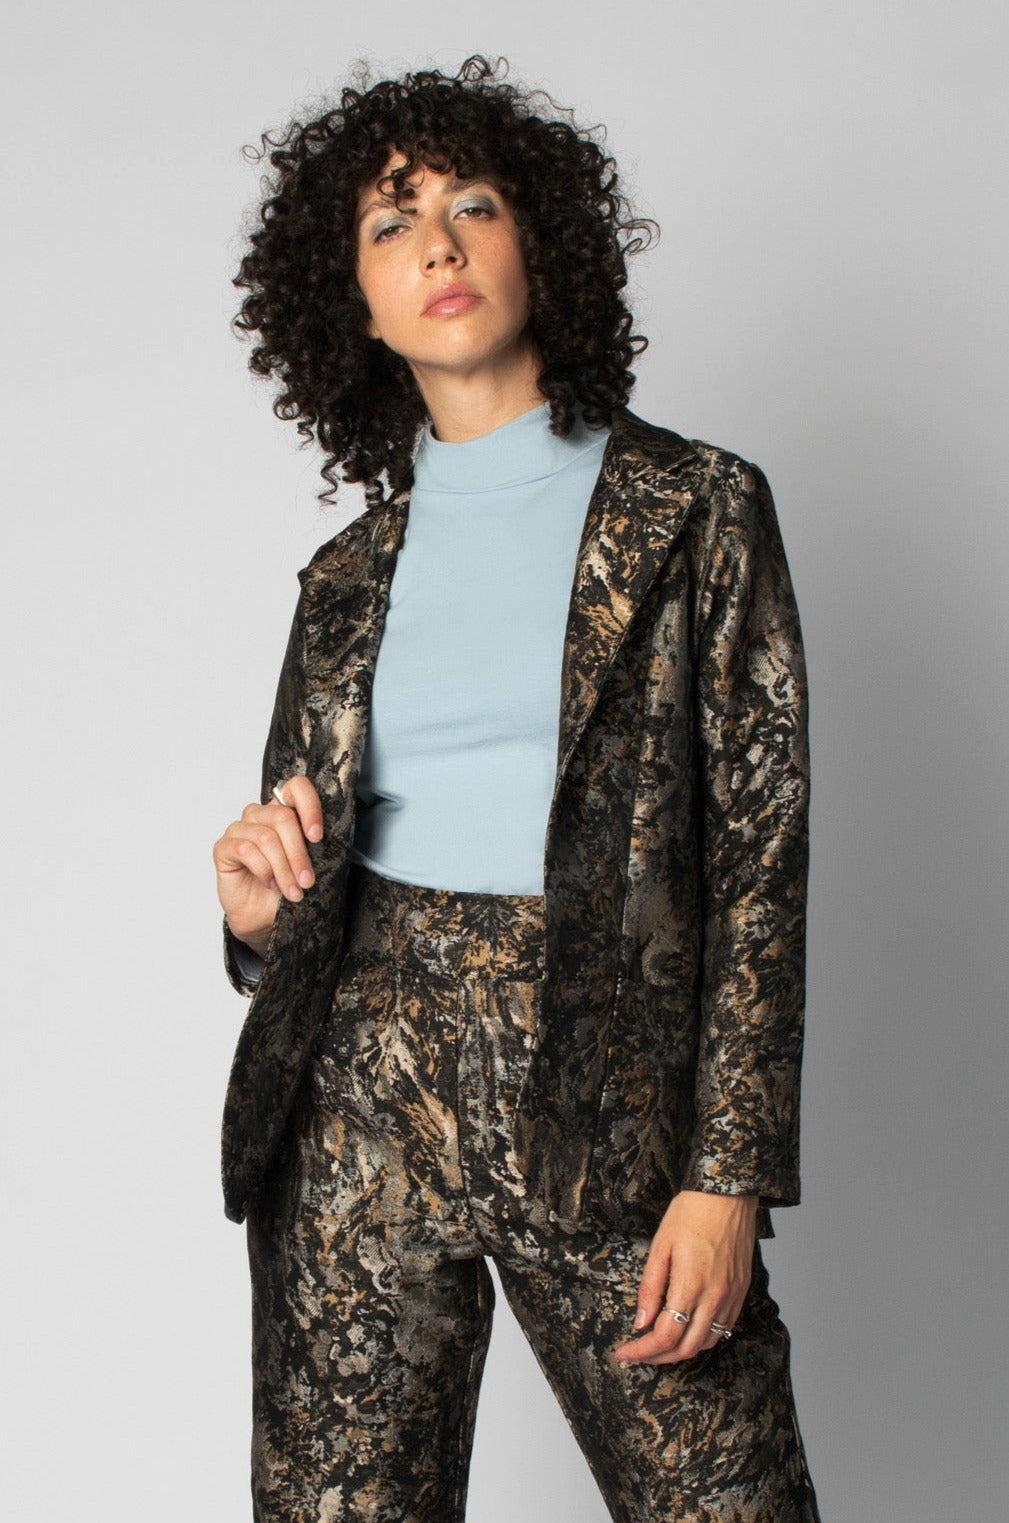 Streep Jacket by Cokluch, Metallic Print, classic blazer shape, rounded botom, side pockets, sizes XS to XL, made in Montreal